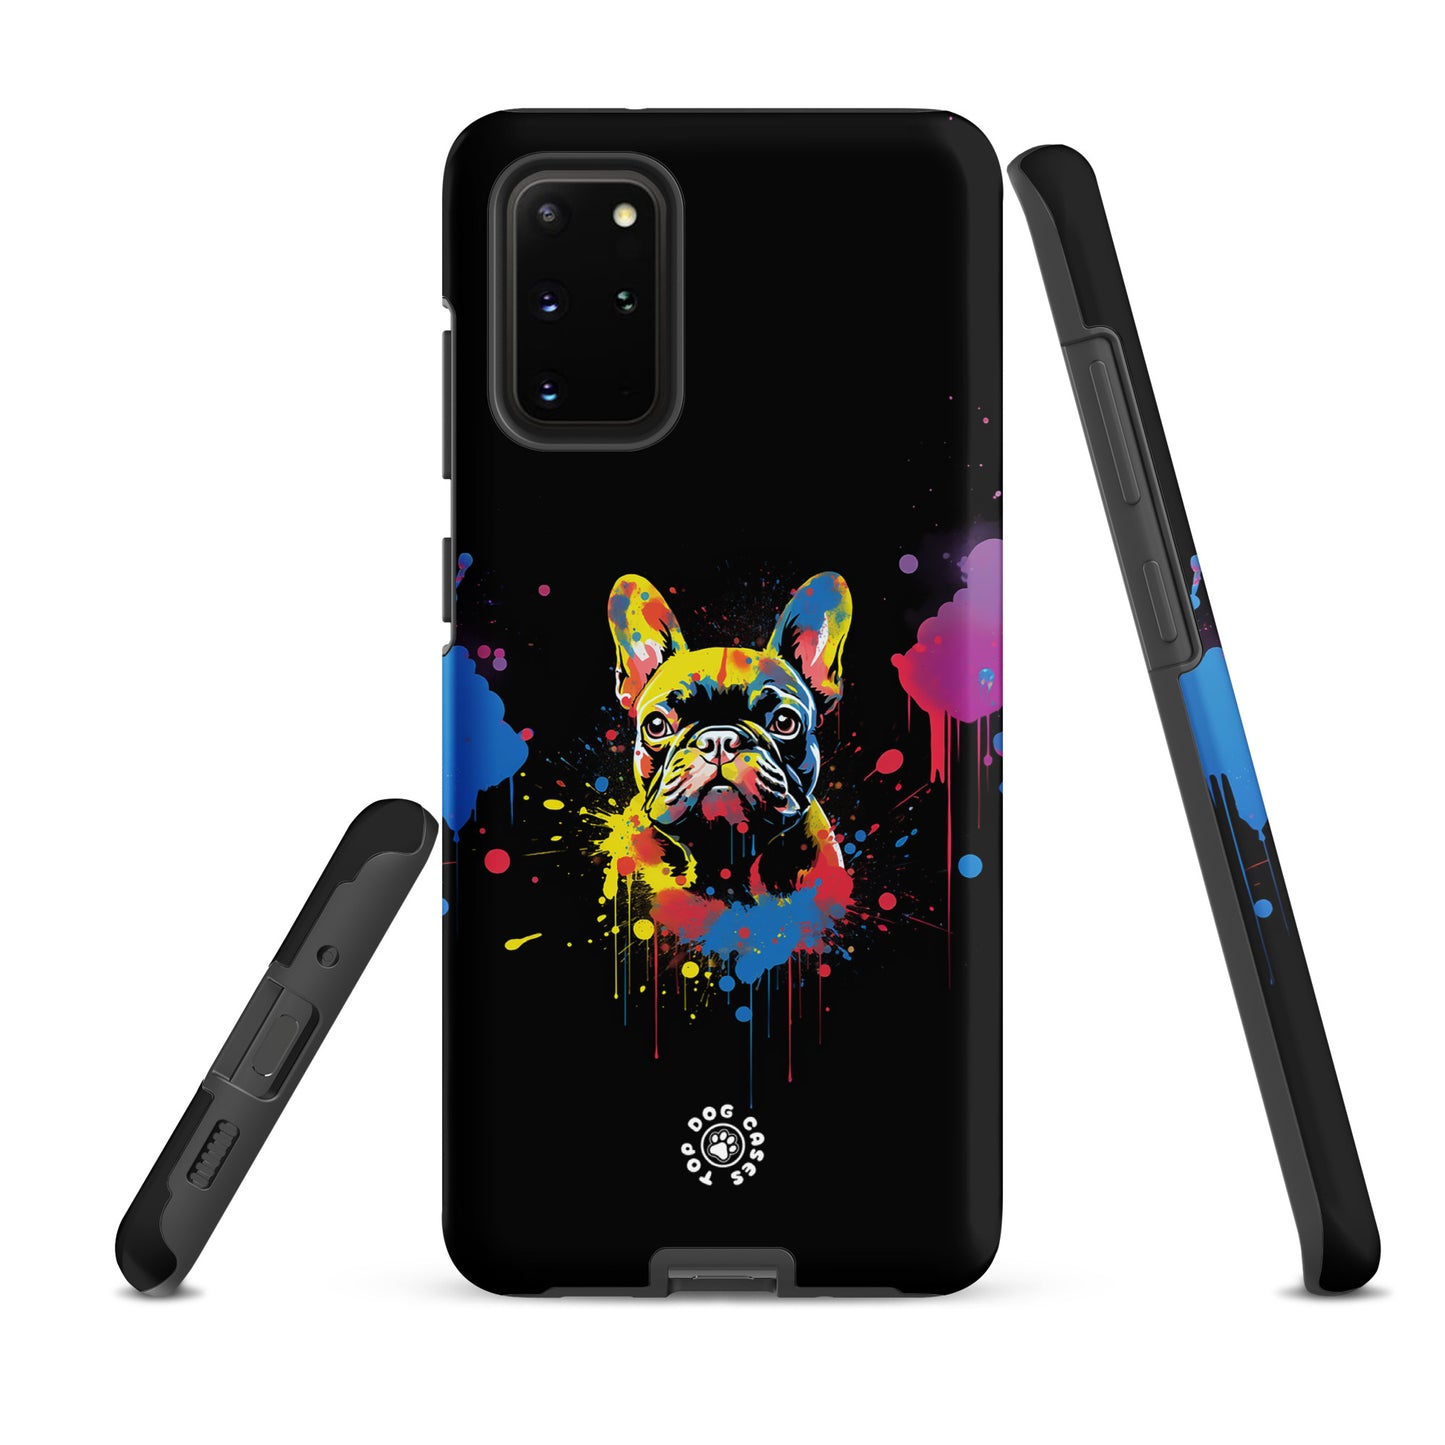 French Bulldog - Colorful Phone Case - Samsung - Top Dog Cases - #ColorfulPhoneCases, #DogPhoneCase, #dogs, #French Bulldog, #FrenchBulldog, #Samsung, #SamsungGalaxy, #SamsungGalaxyCase, #SamsungGalaxyS10, #SamsungGalaxyS20, #SamsungGalaxyS21, #SamsungGalaxyS22, #SamsungGalaxyS22Ultra, #SamsungGalaxyS23, #SamsungGalaxyS23Plus, #SamsungGalaxyS23Ultra, #SamsungPhoneCase, #ToughCase, SamsungGalaxyS20Plus, SamsungGalaxyS22Plus